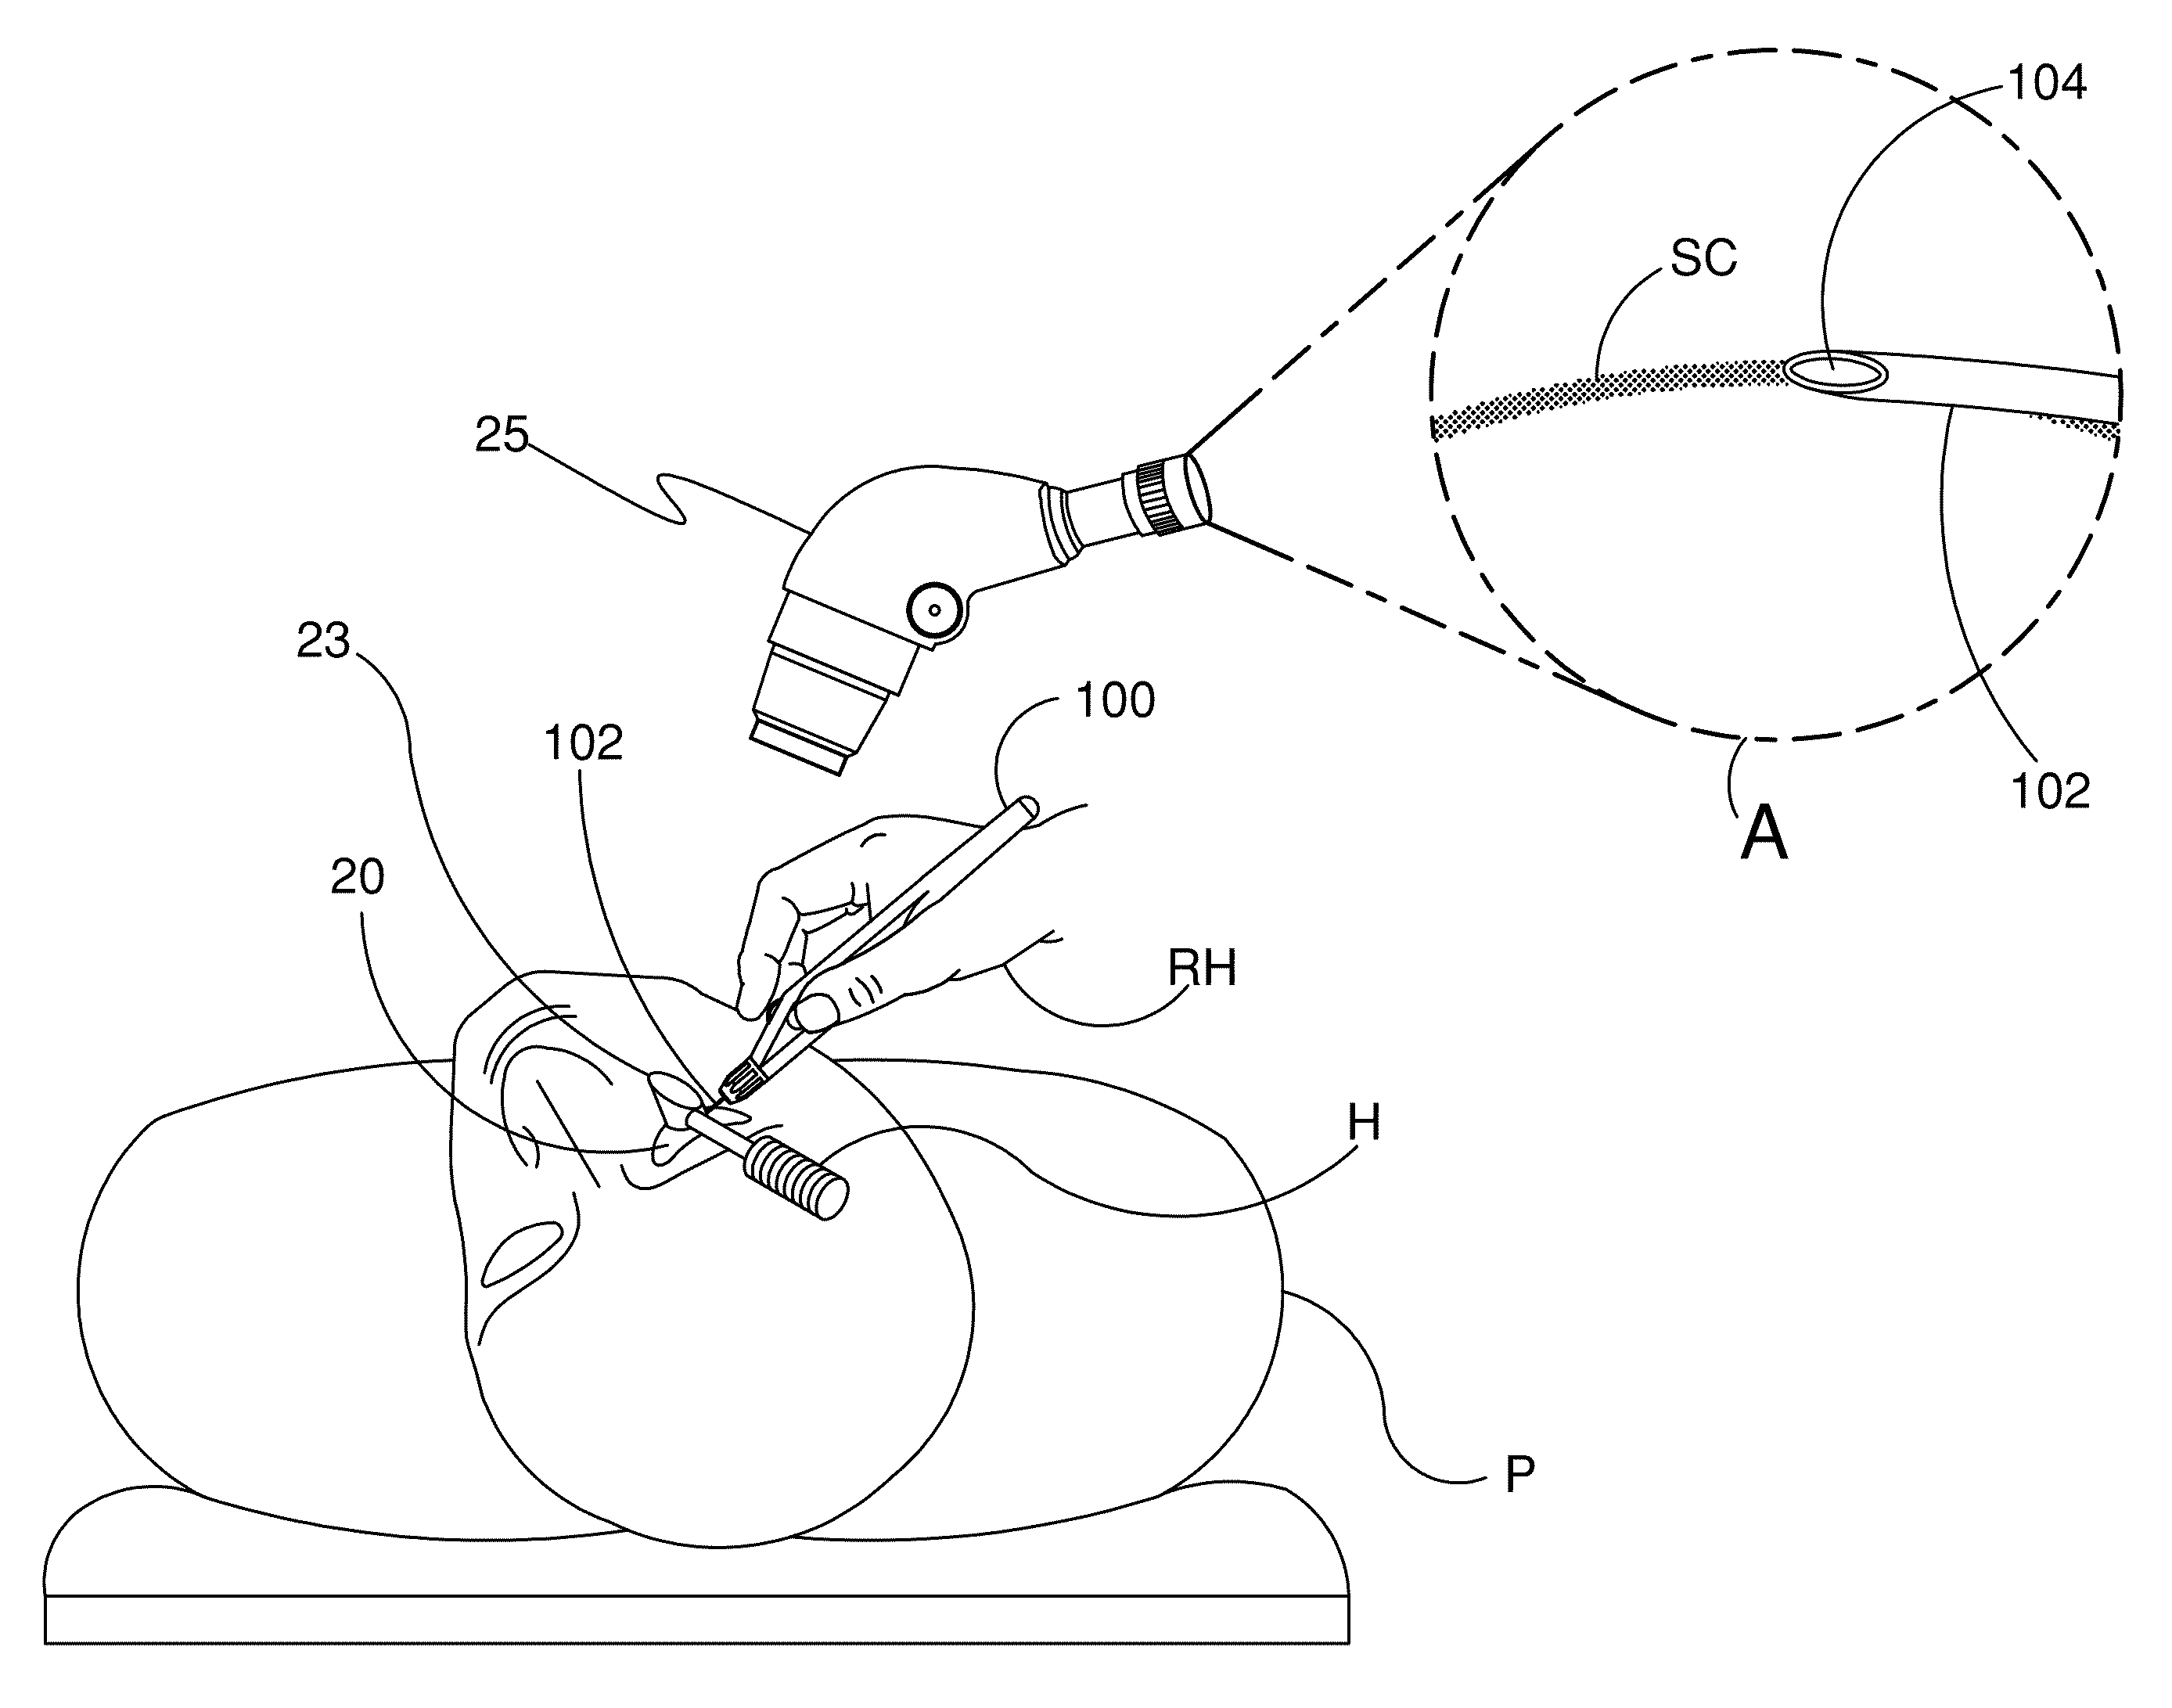 Ocular Implants and Methods for Delivering Ocular Implants Into the Eye